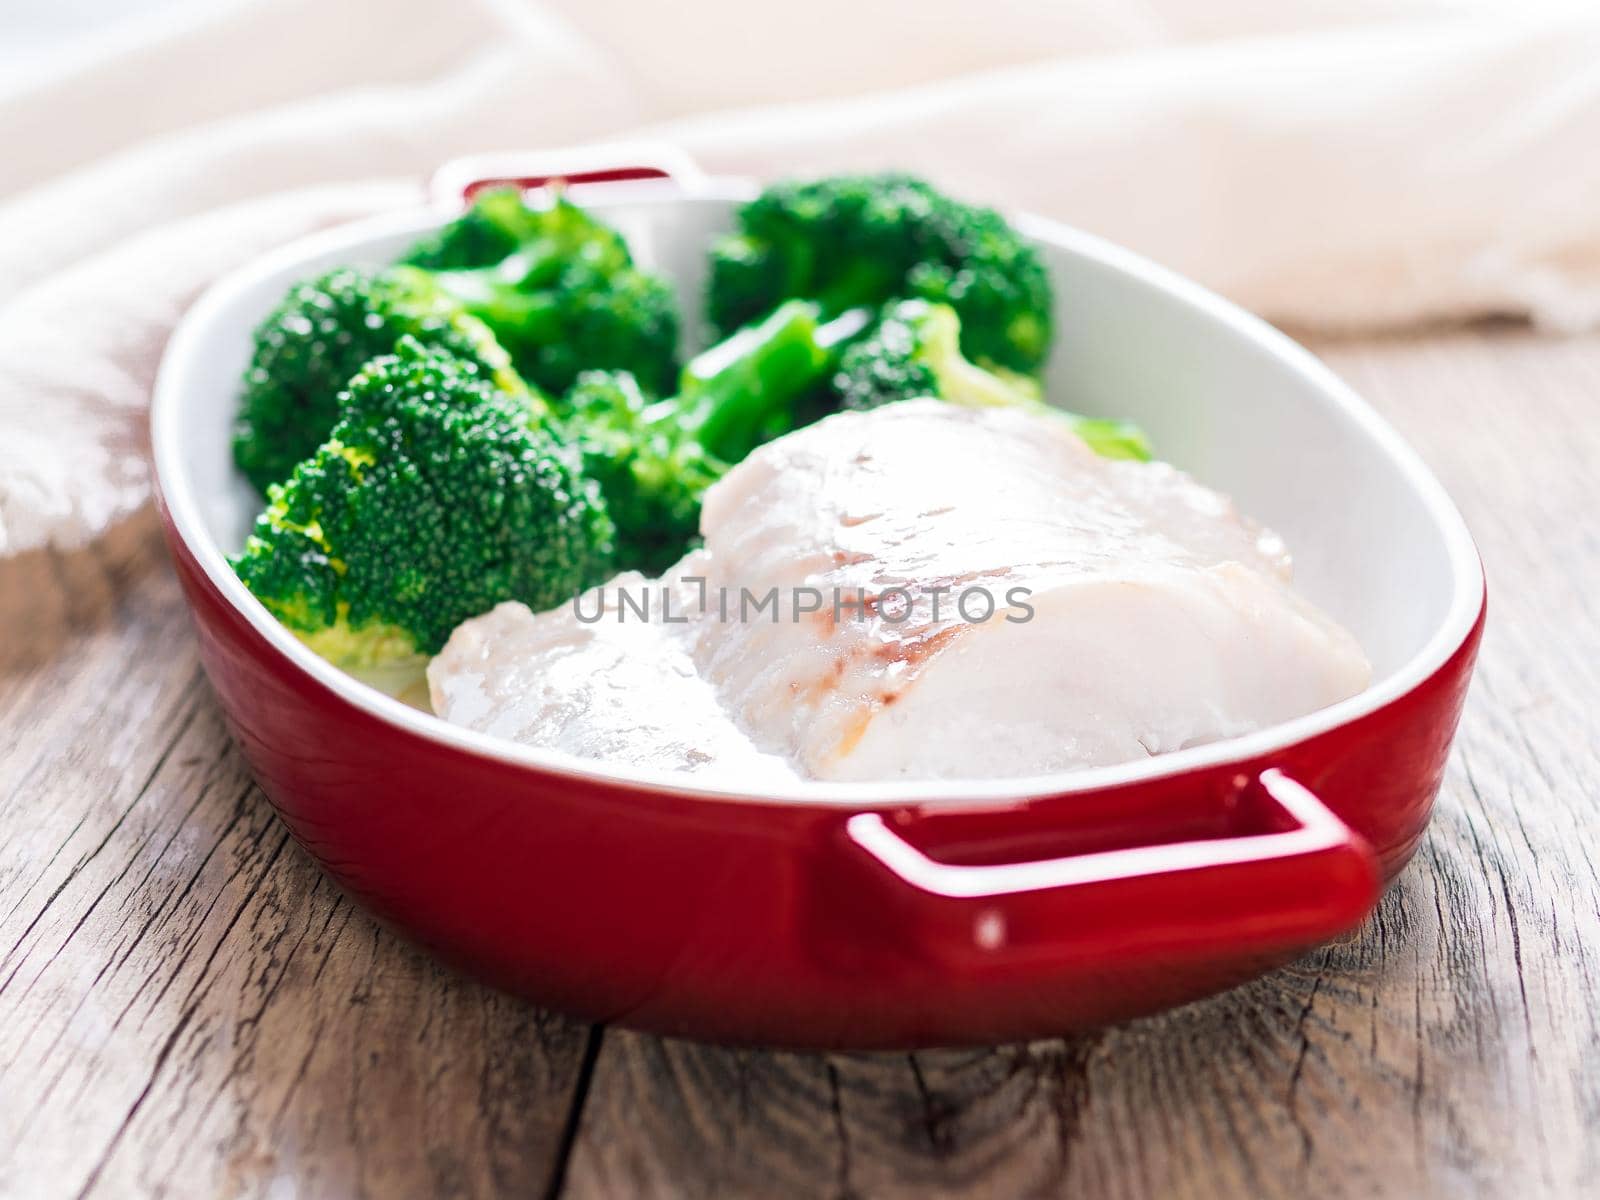 Fish cod baked in the oven with broccoli - healthy diet healthy food. Rustic wooden brown background, side view, selective focus. by NataBene